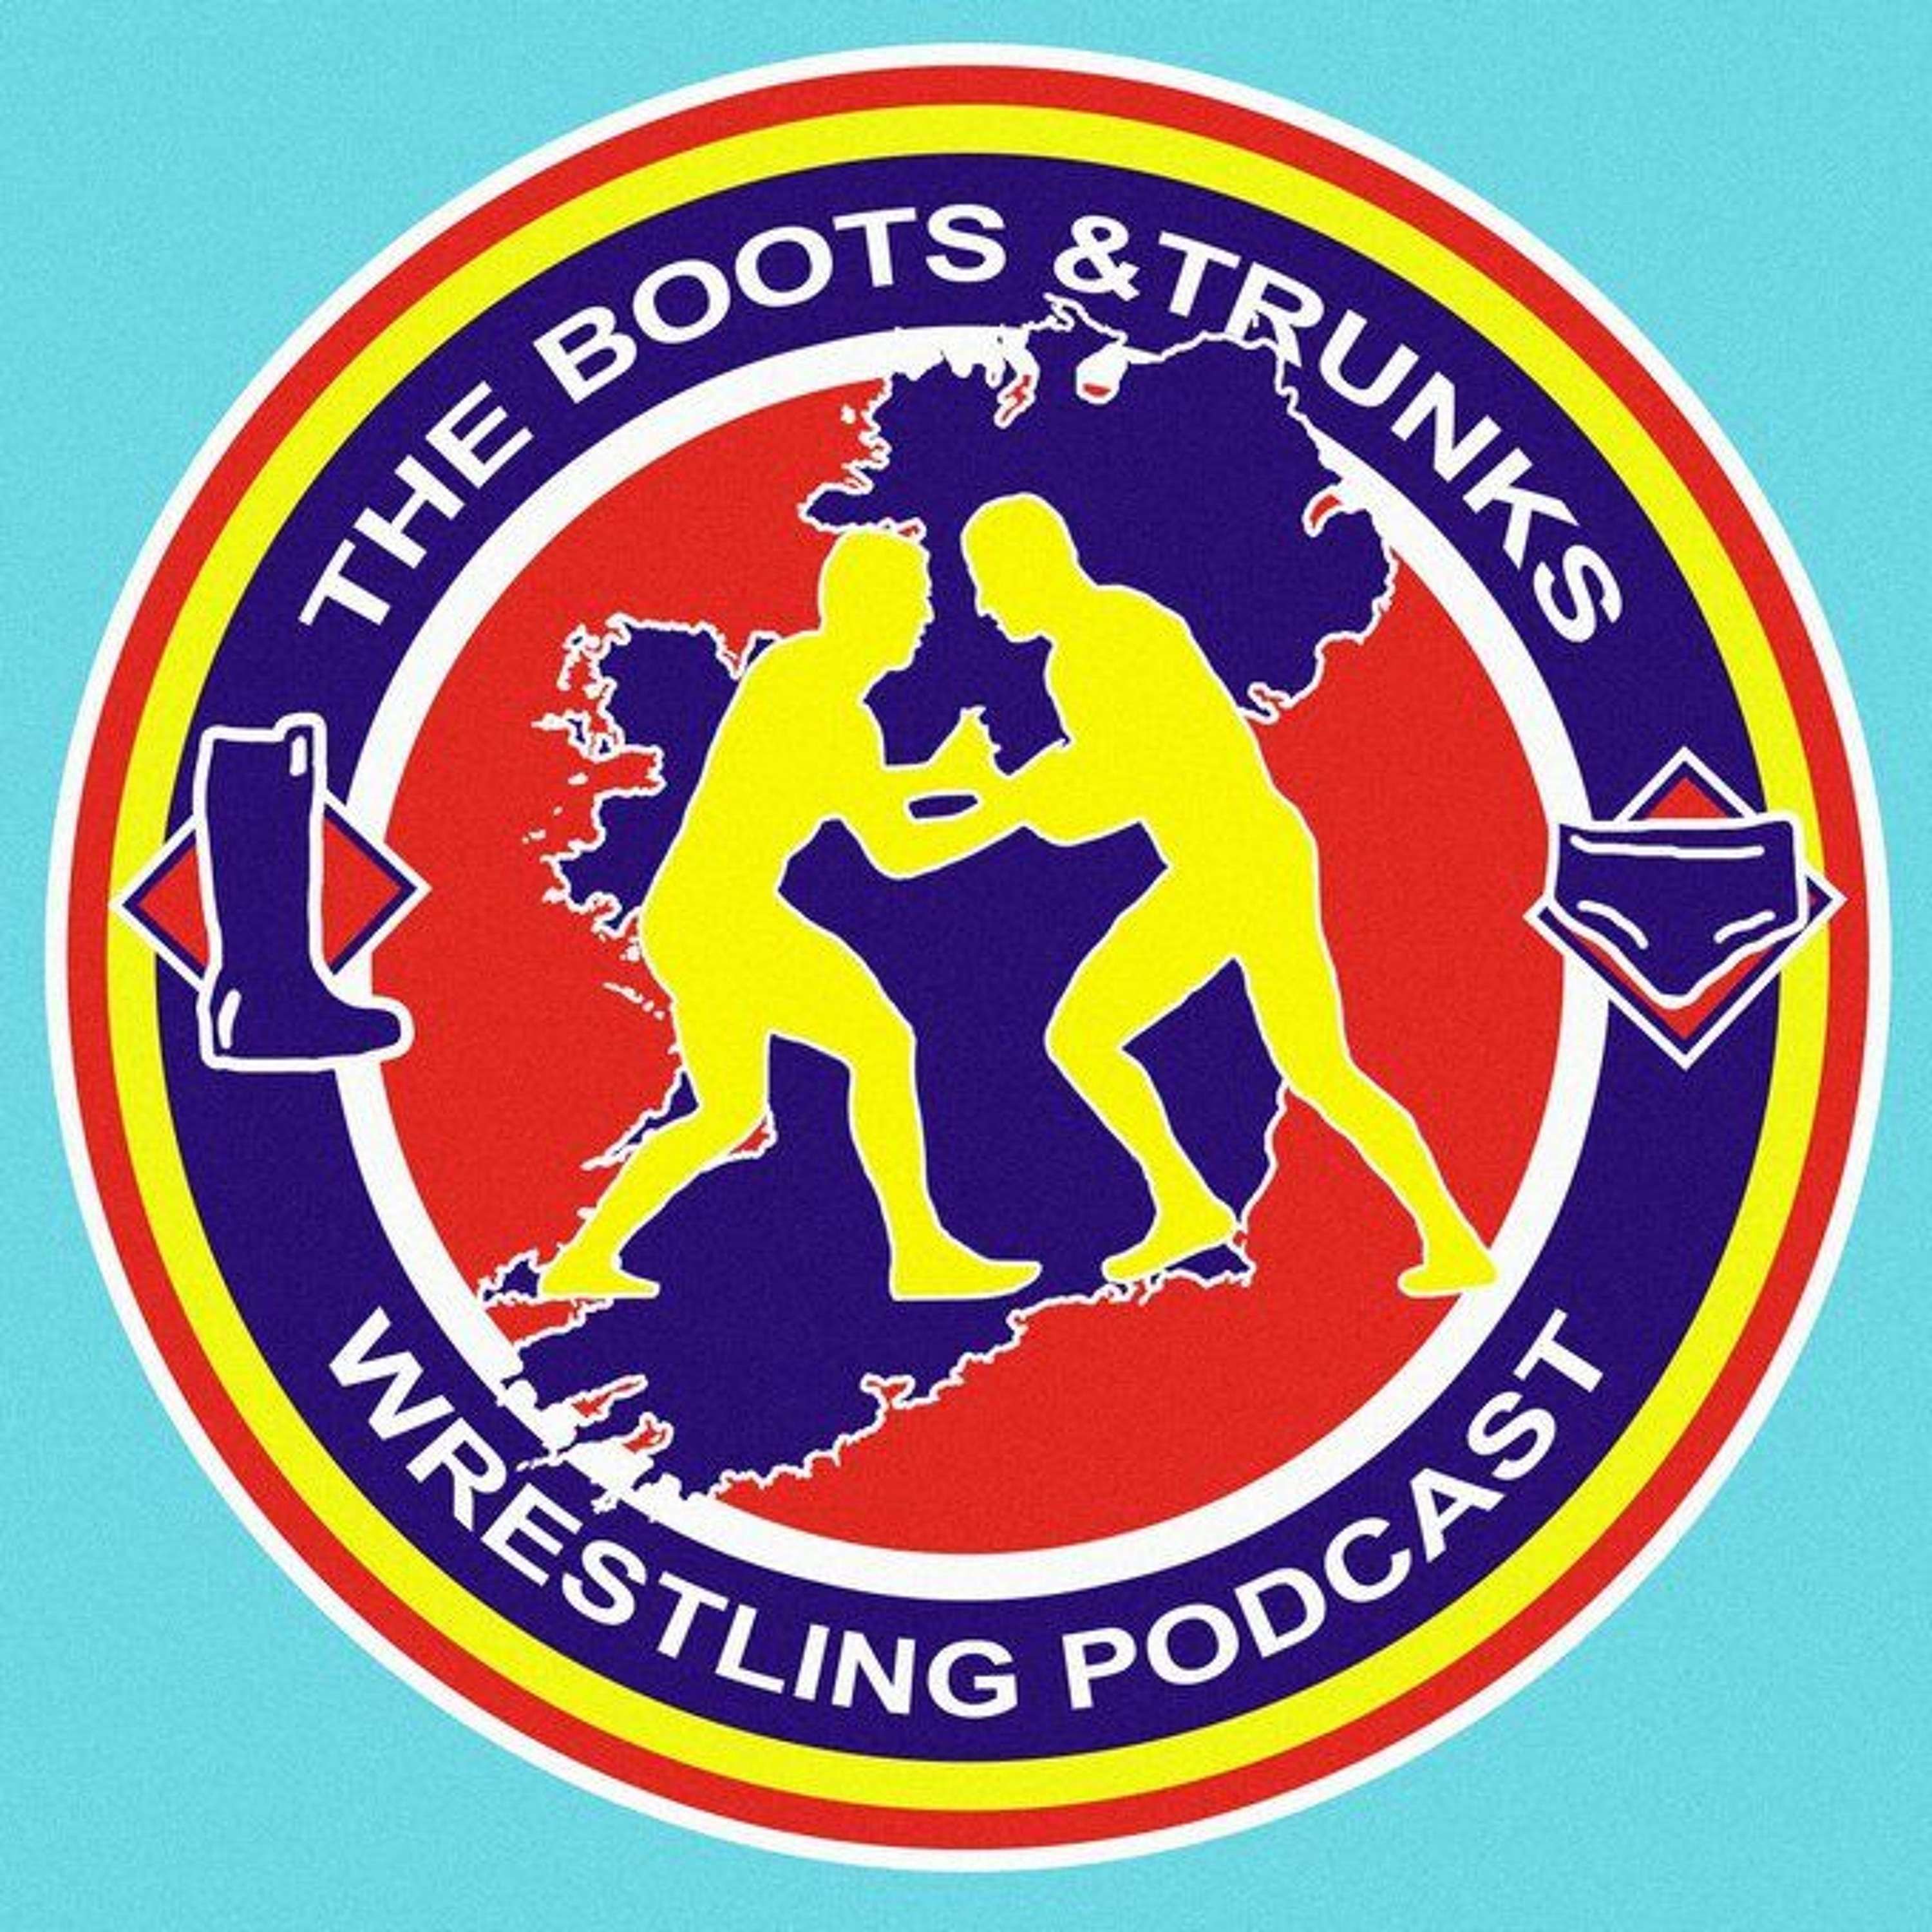 The Boots and Trunks Podcast: Episode 1 - Always the Bridesmaid, Never the Bride